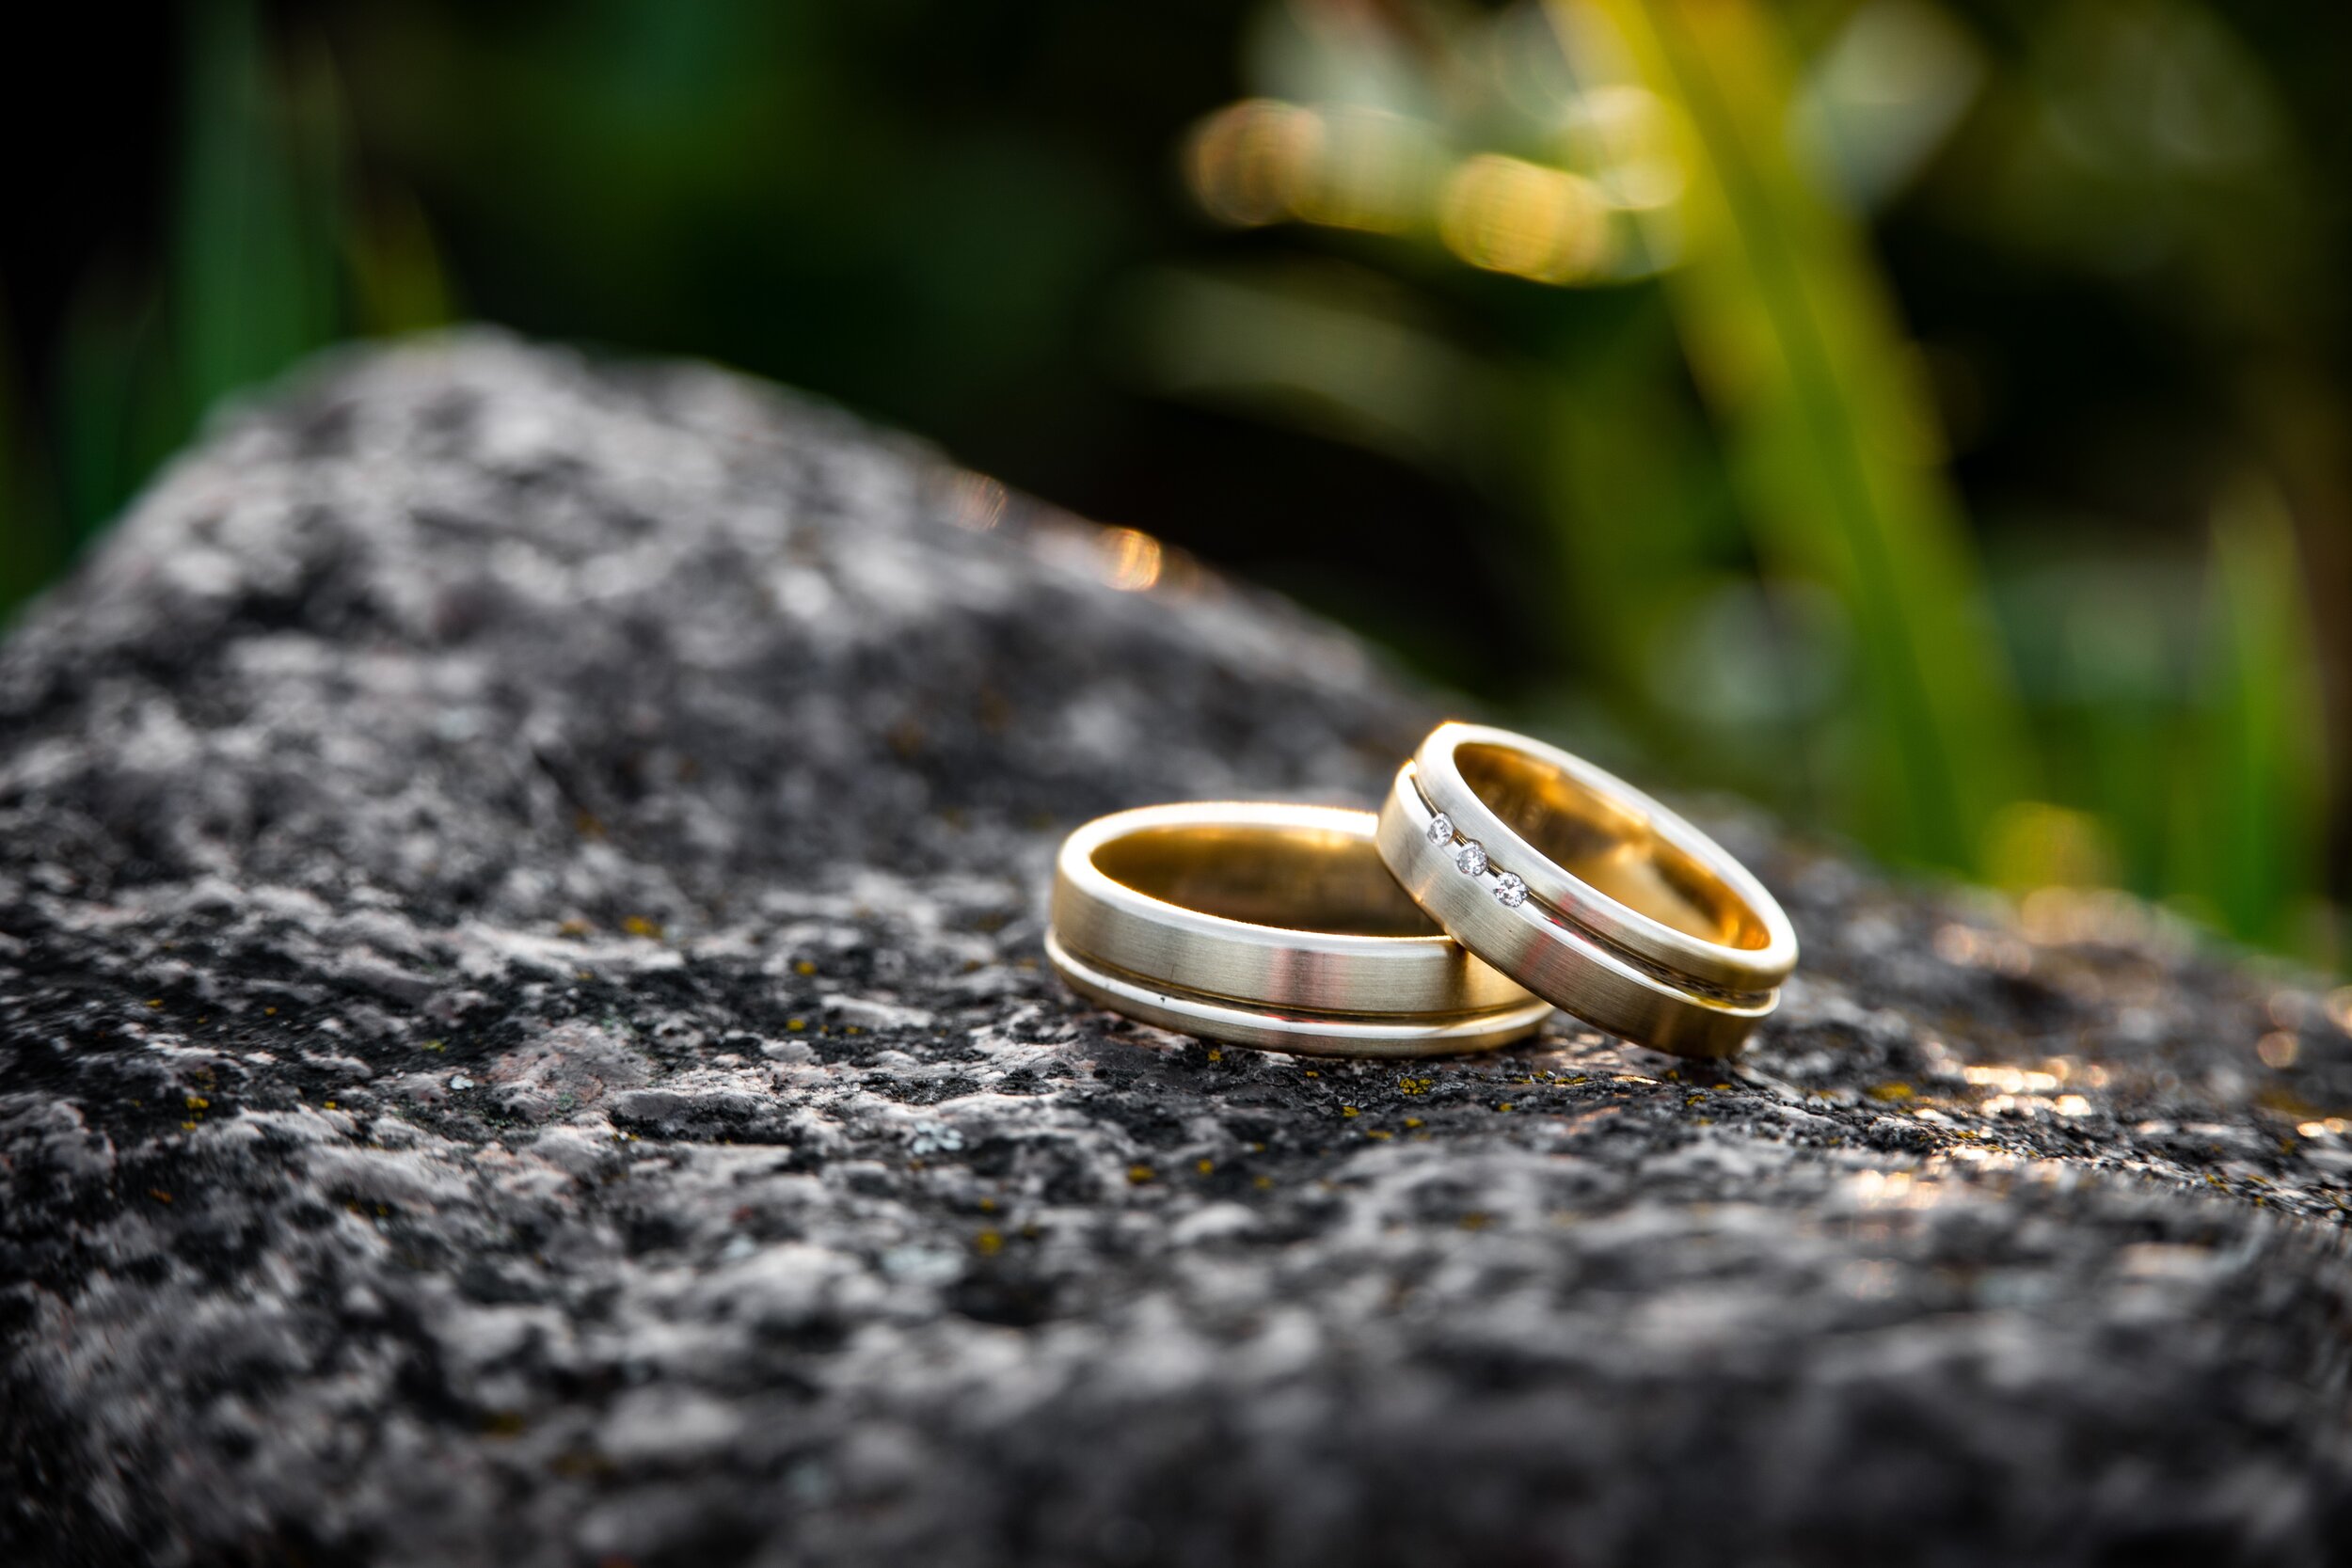 Widows and wedding rings etiquette